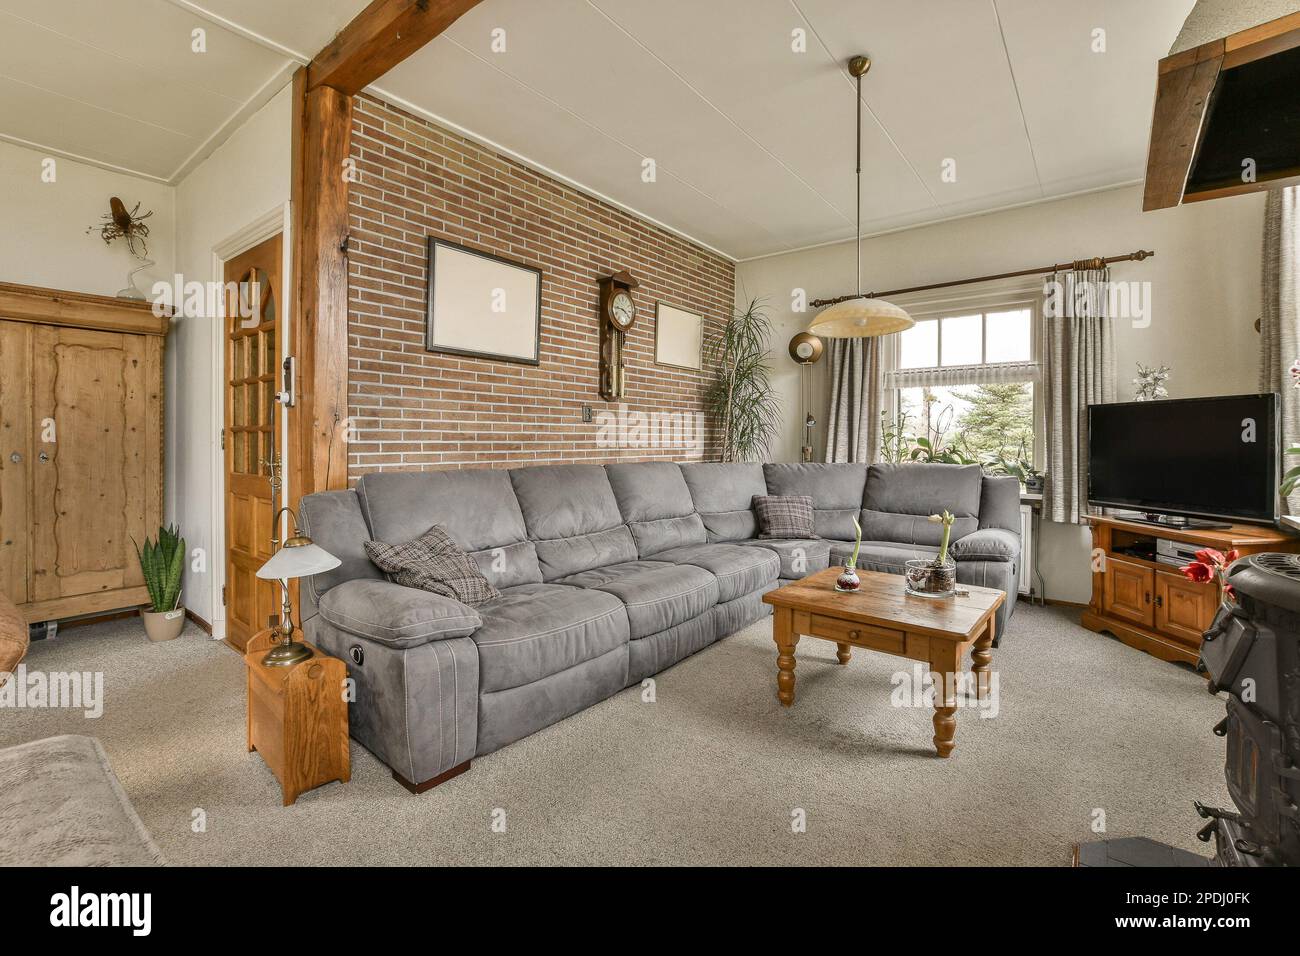 a living room with couches and a television set in the middle of the room, there is a brick wall that has been Stock Photo